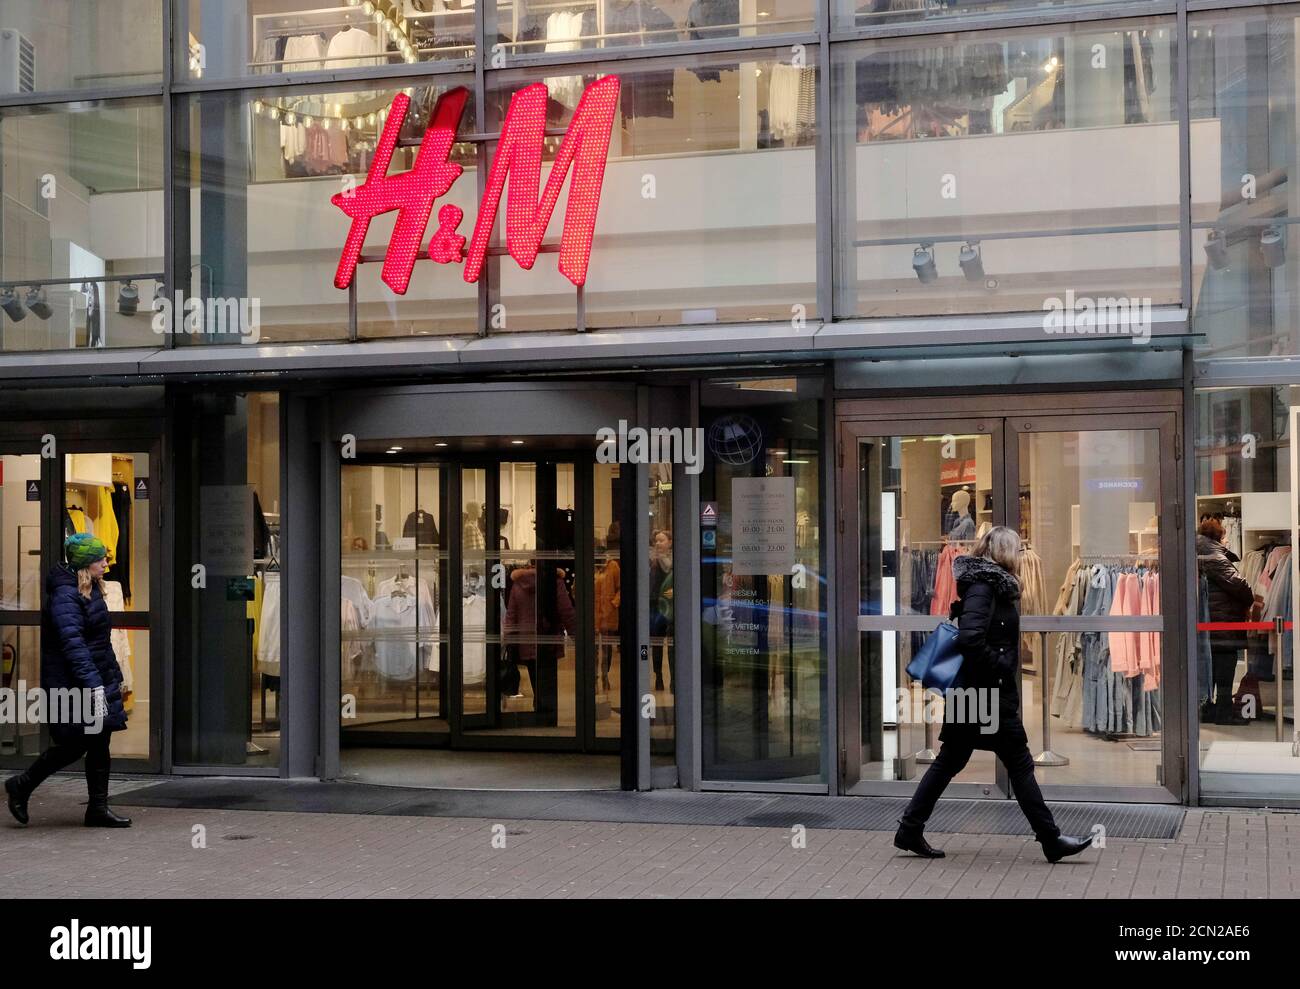 Page 3 - H&m Shop High Resolution Stock Photography and Images - Alamy